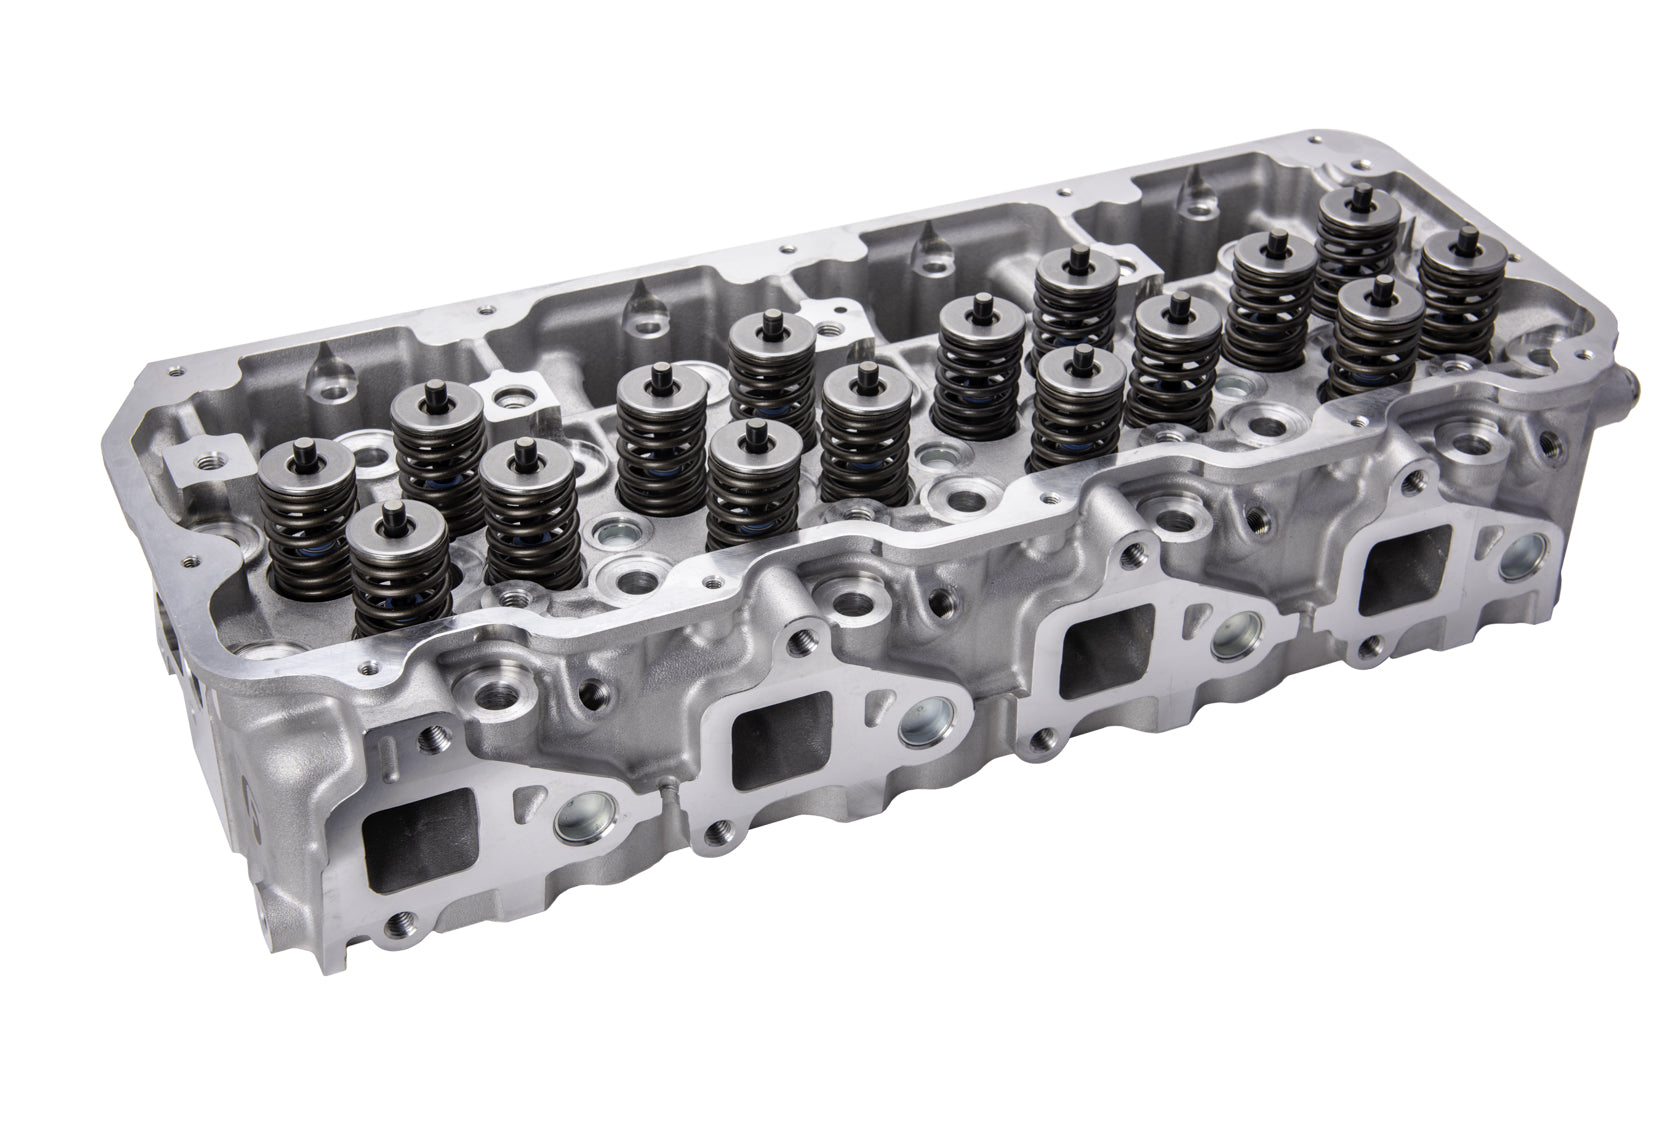 Fleece Performance Freedom Series Duramax Cylinder Head with Cupless Injector Bore for 2001-2004 LB7 (Passenger Side) FPE-61-10001-P-CLA